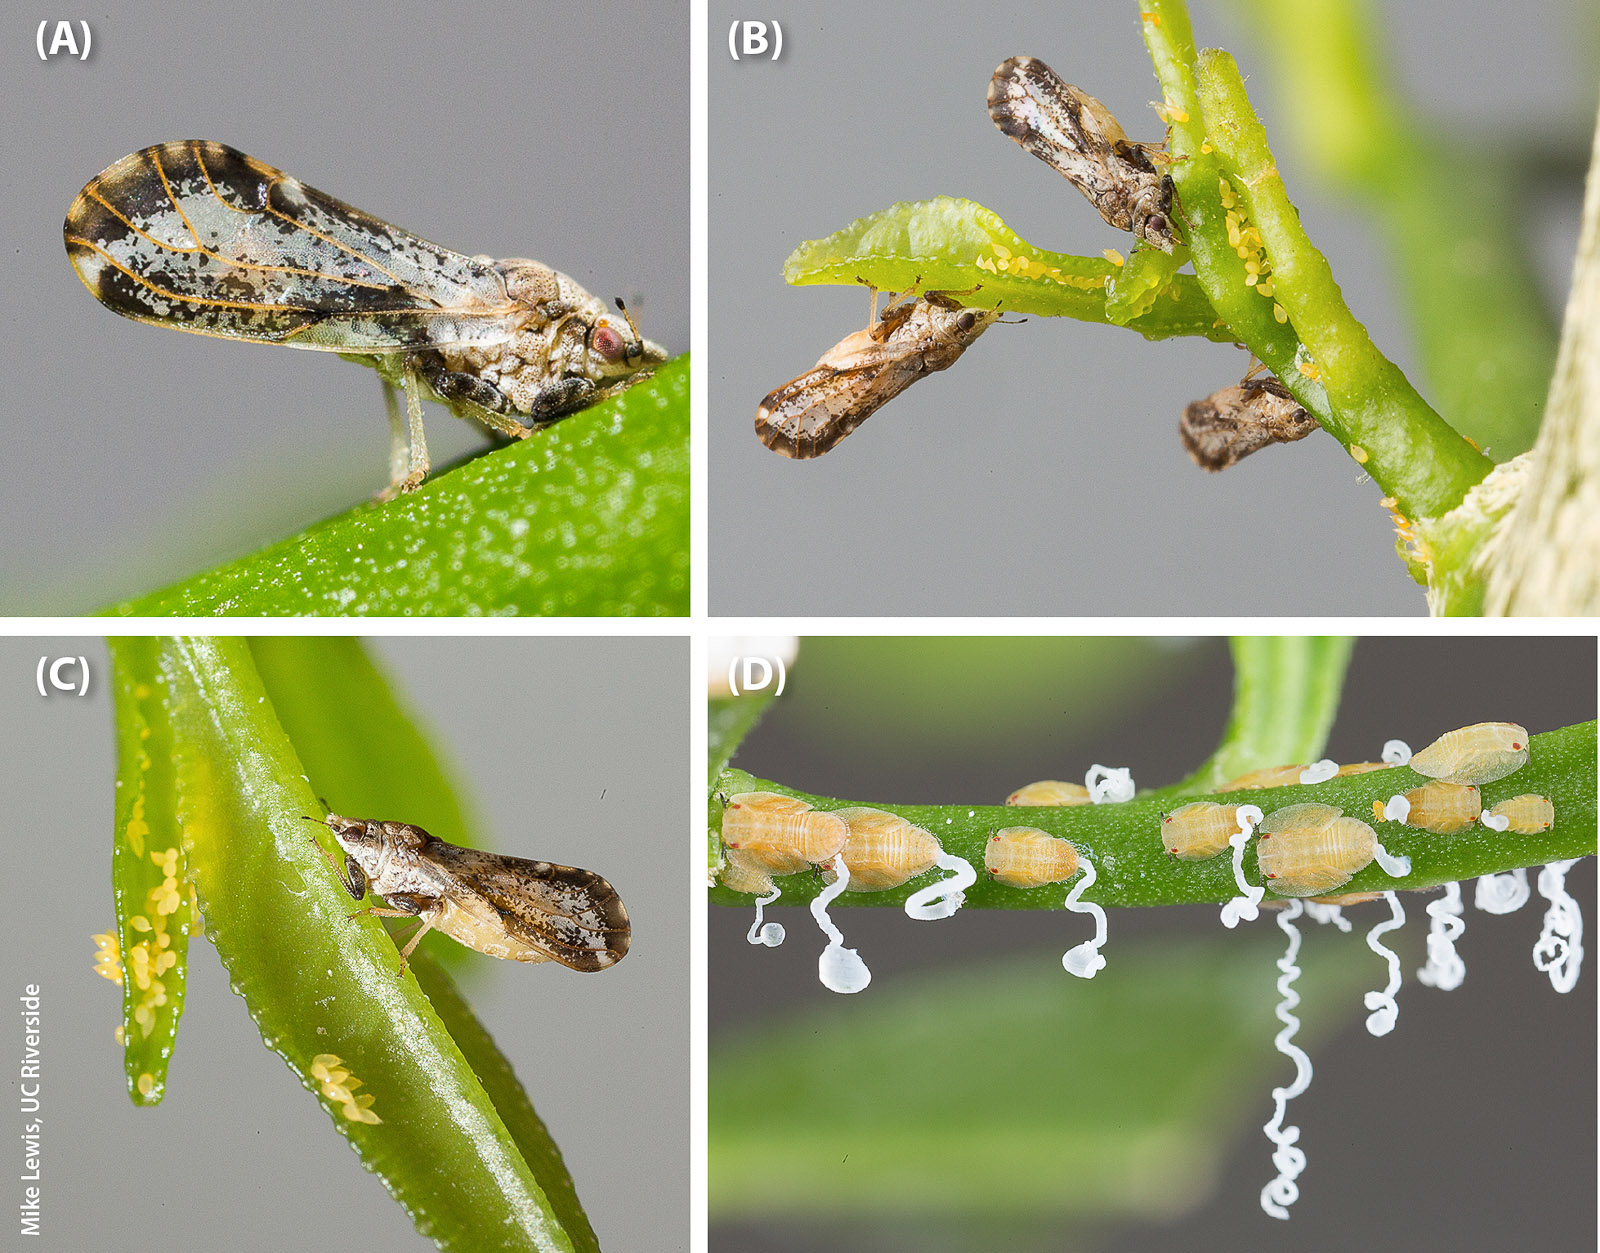 Asian citrus psyllid life stages: (A) adult psyllid feeding on young tissue, (B, C) gravid adult females and eggs on citrus flush and (D) nymphs producing white honeydew secretions that are harvested by Argentine ants.